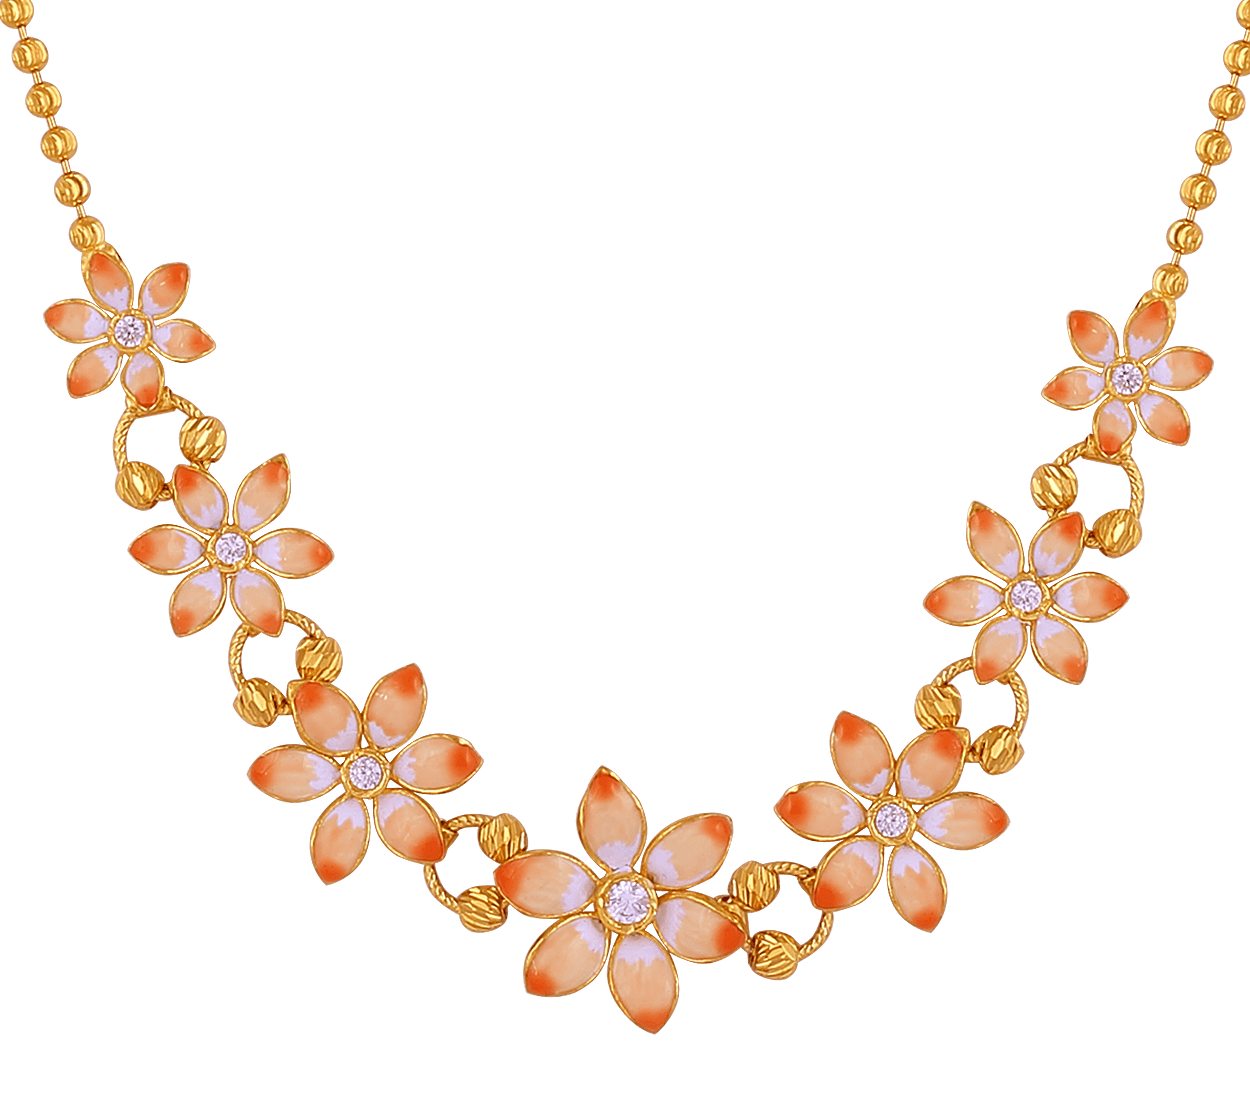 https://www.ariajewellers.in/storage//product/Flower chain-1590710093-10_04_2023_10_53_am.png?format=webp